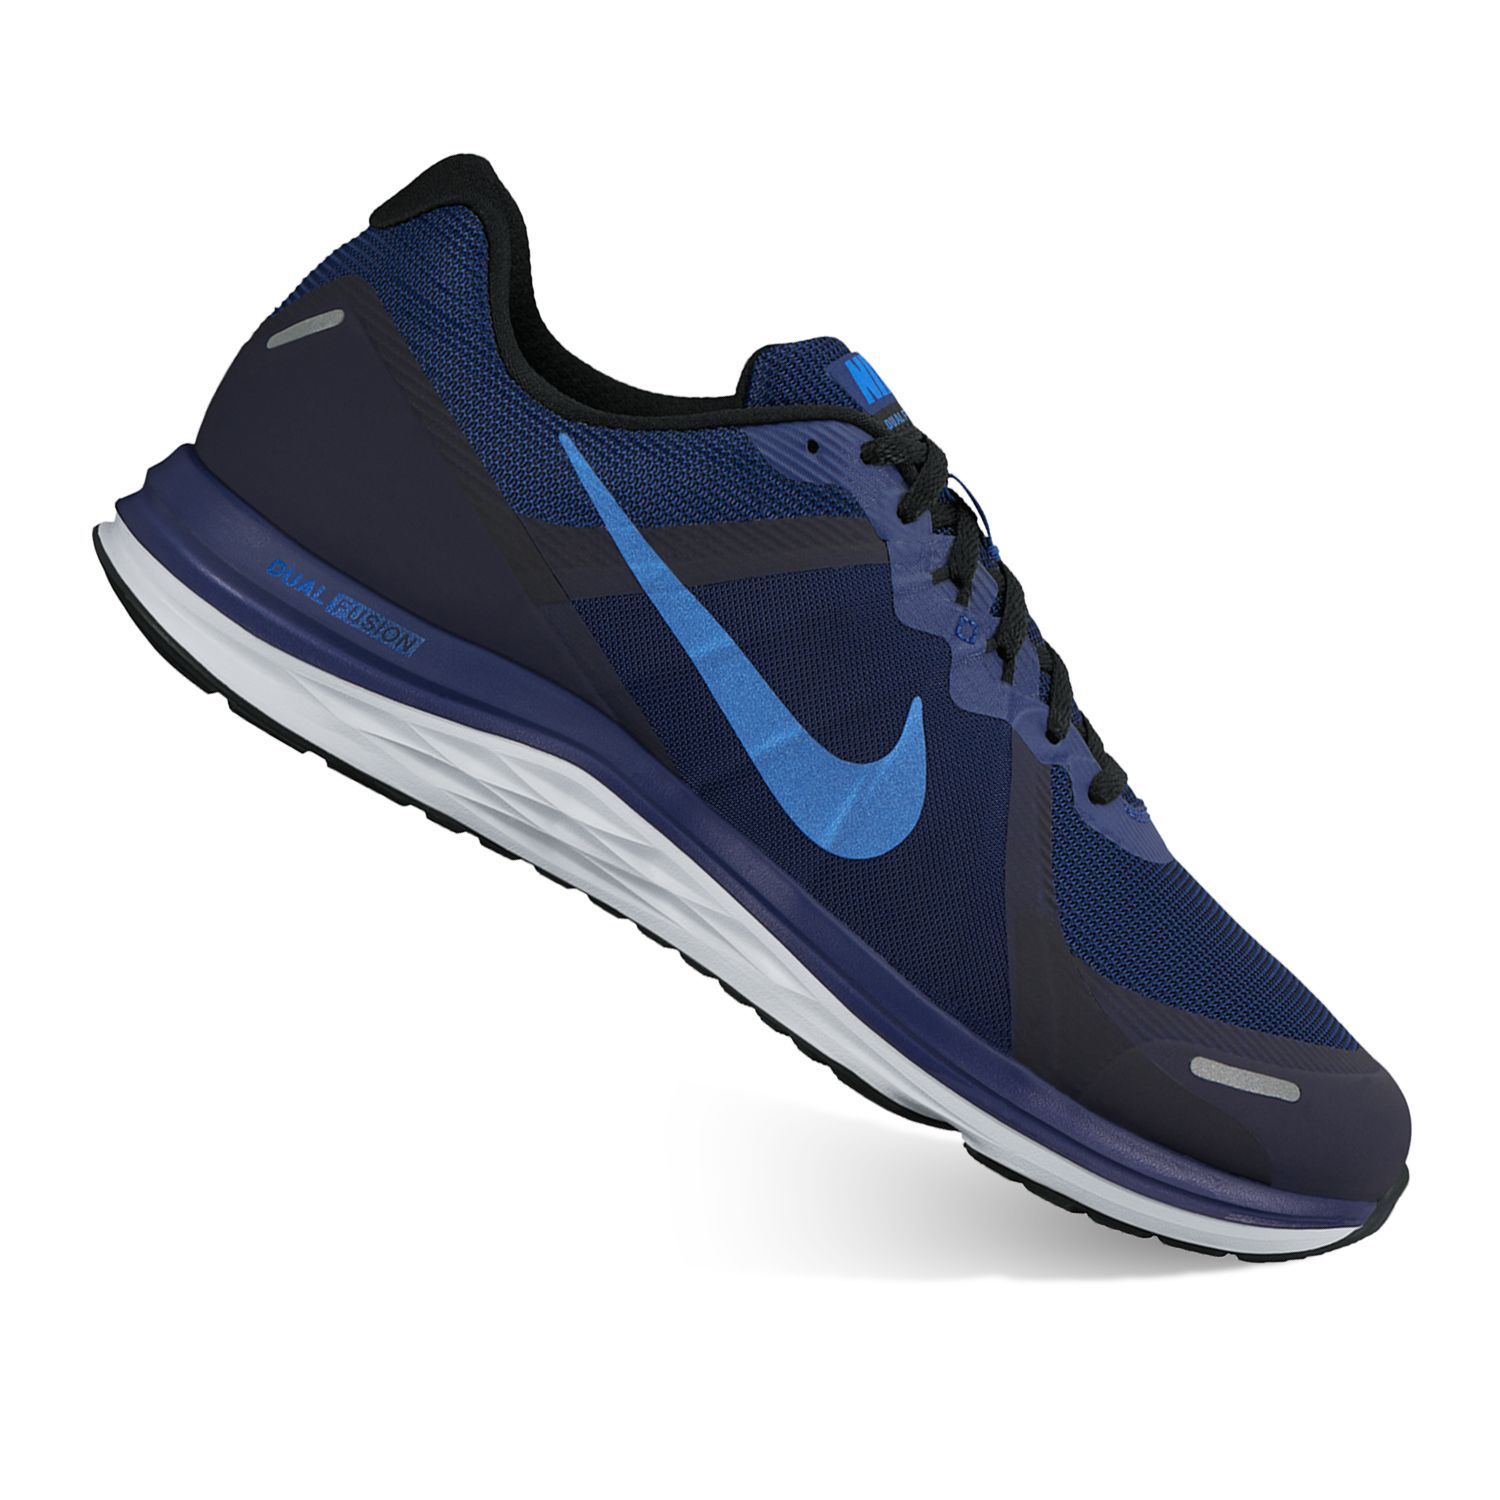 nike flywire dual fusion womens